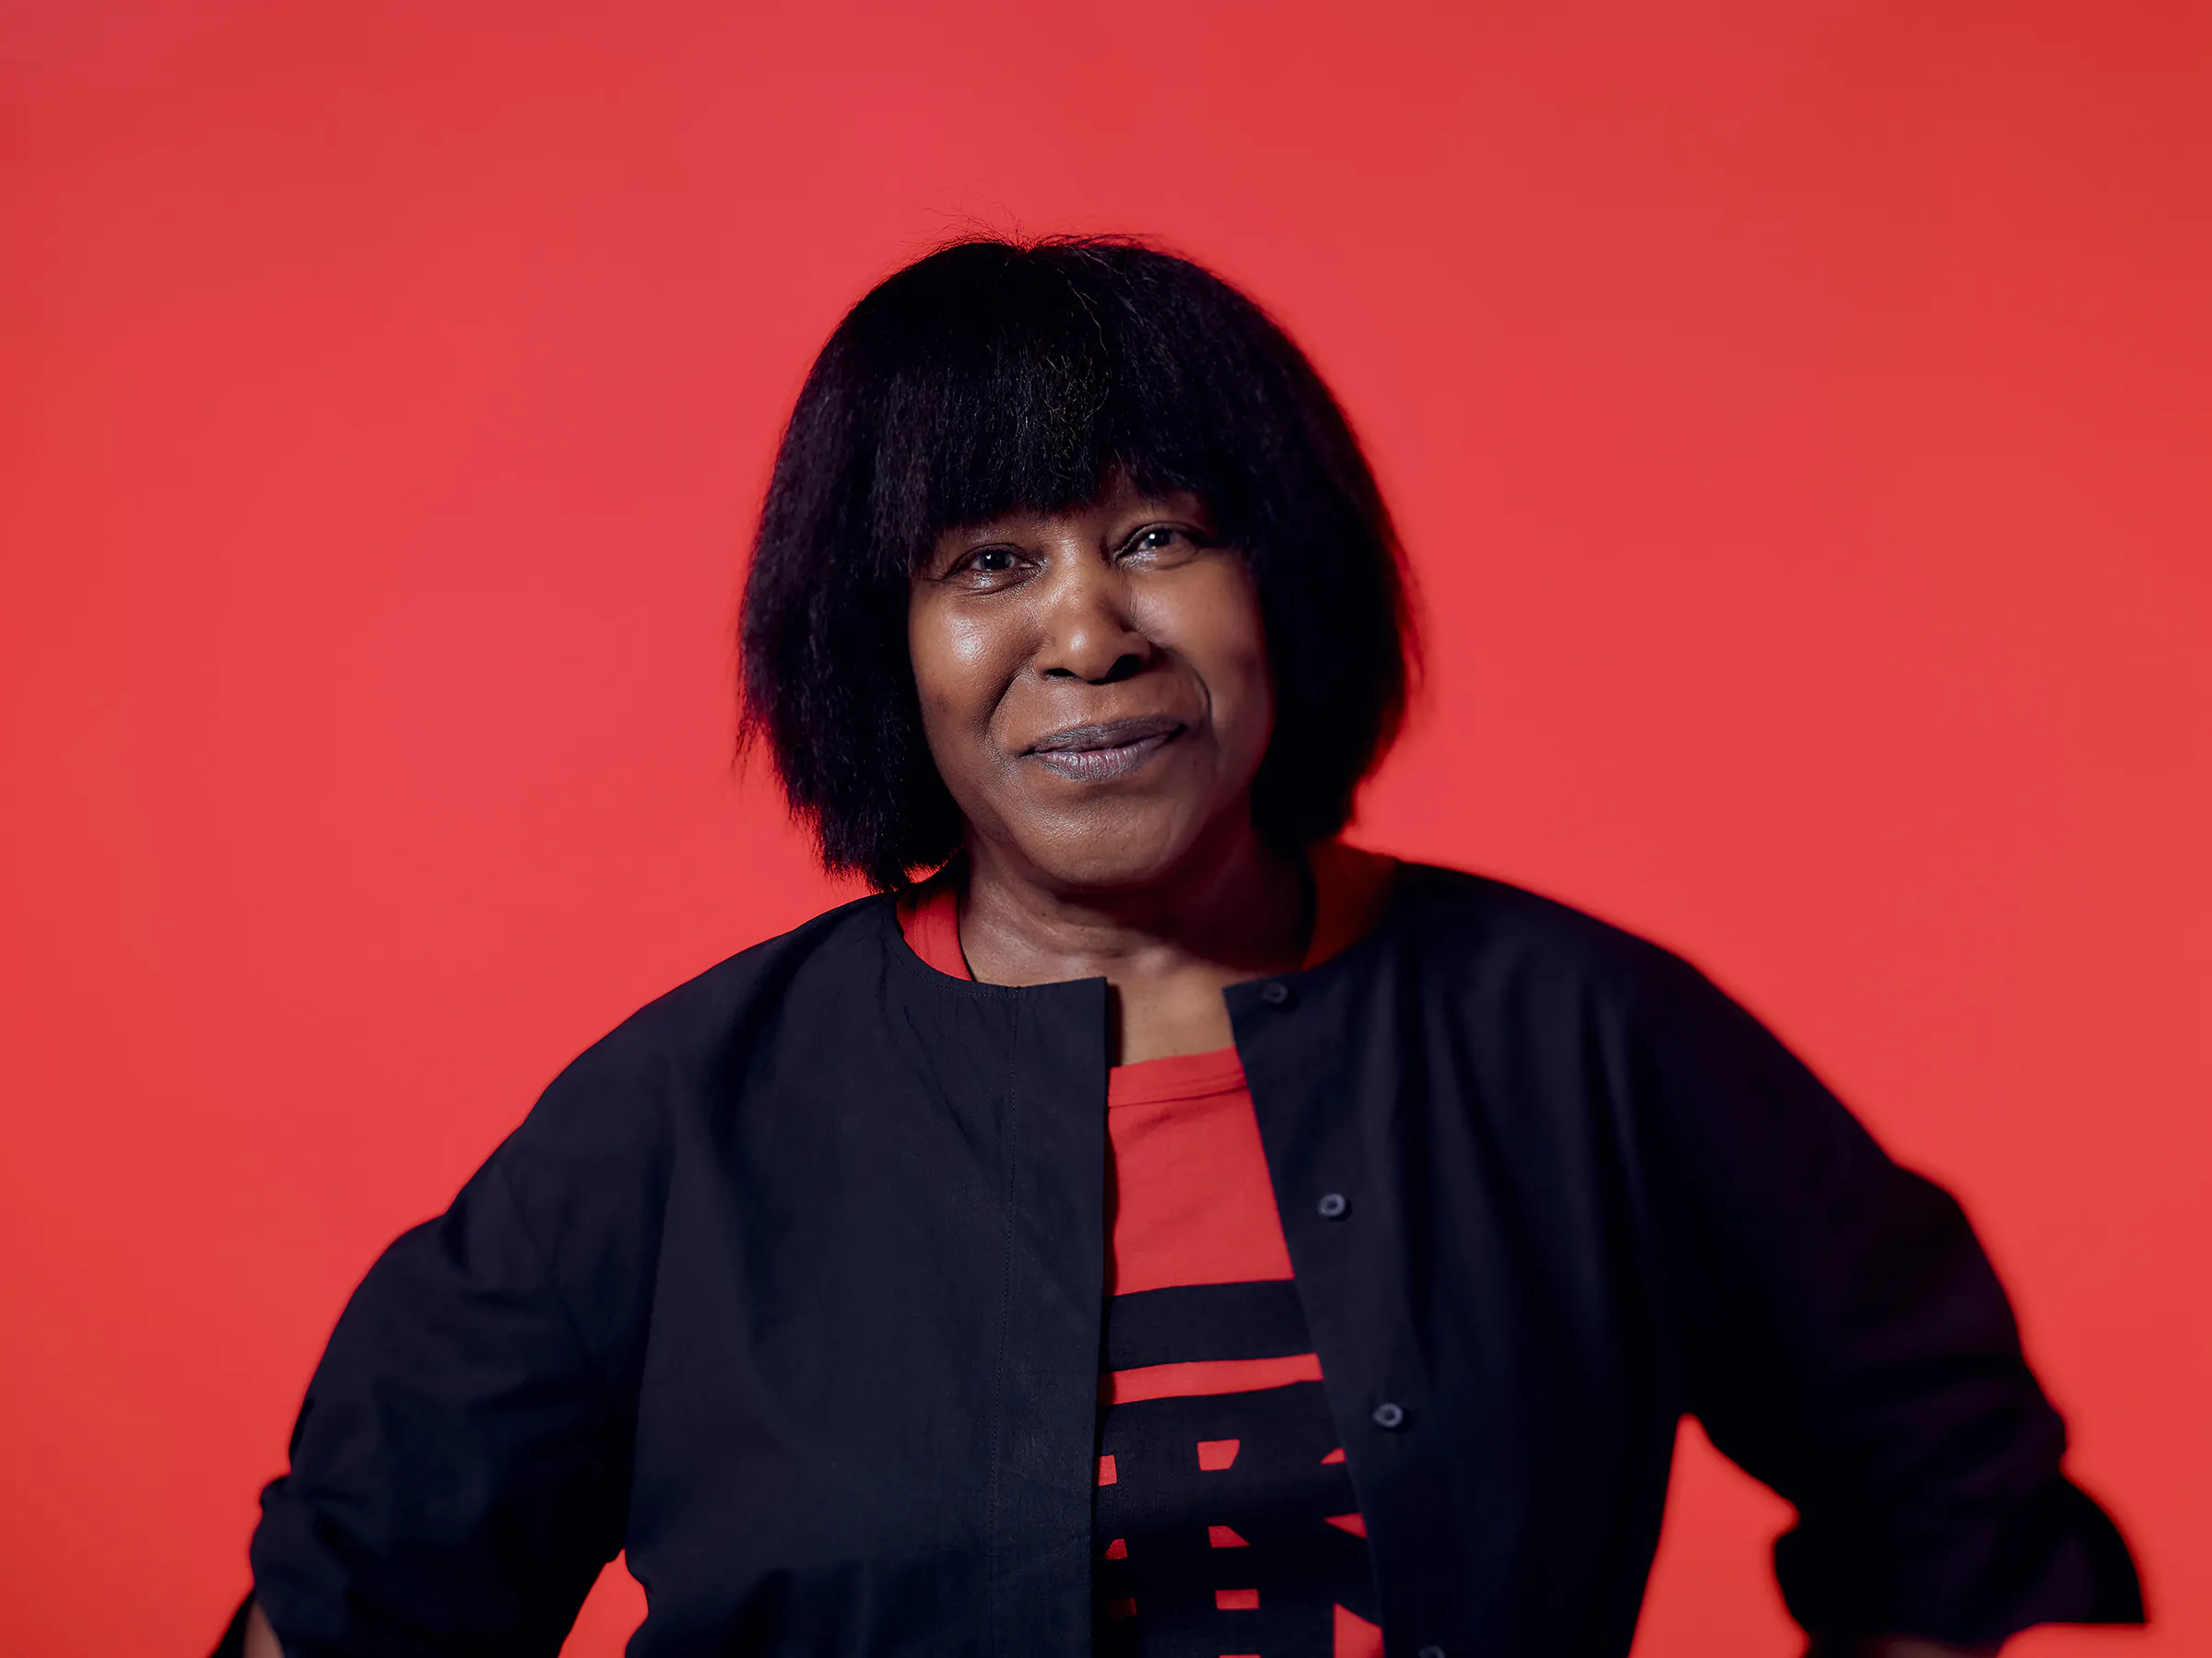 JOAN ARMATRADING releases ‘Like’ from her upcoming album Consequences